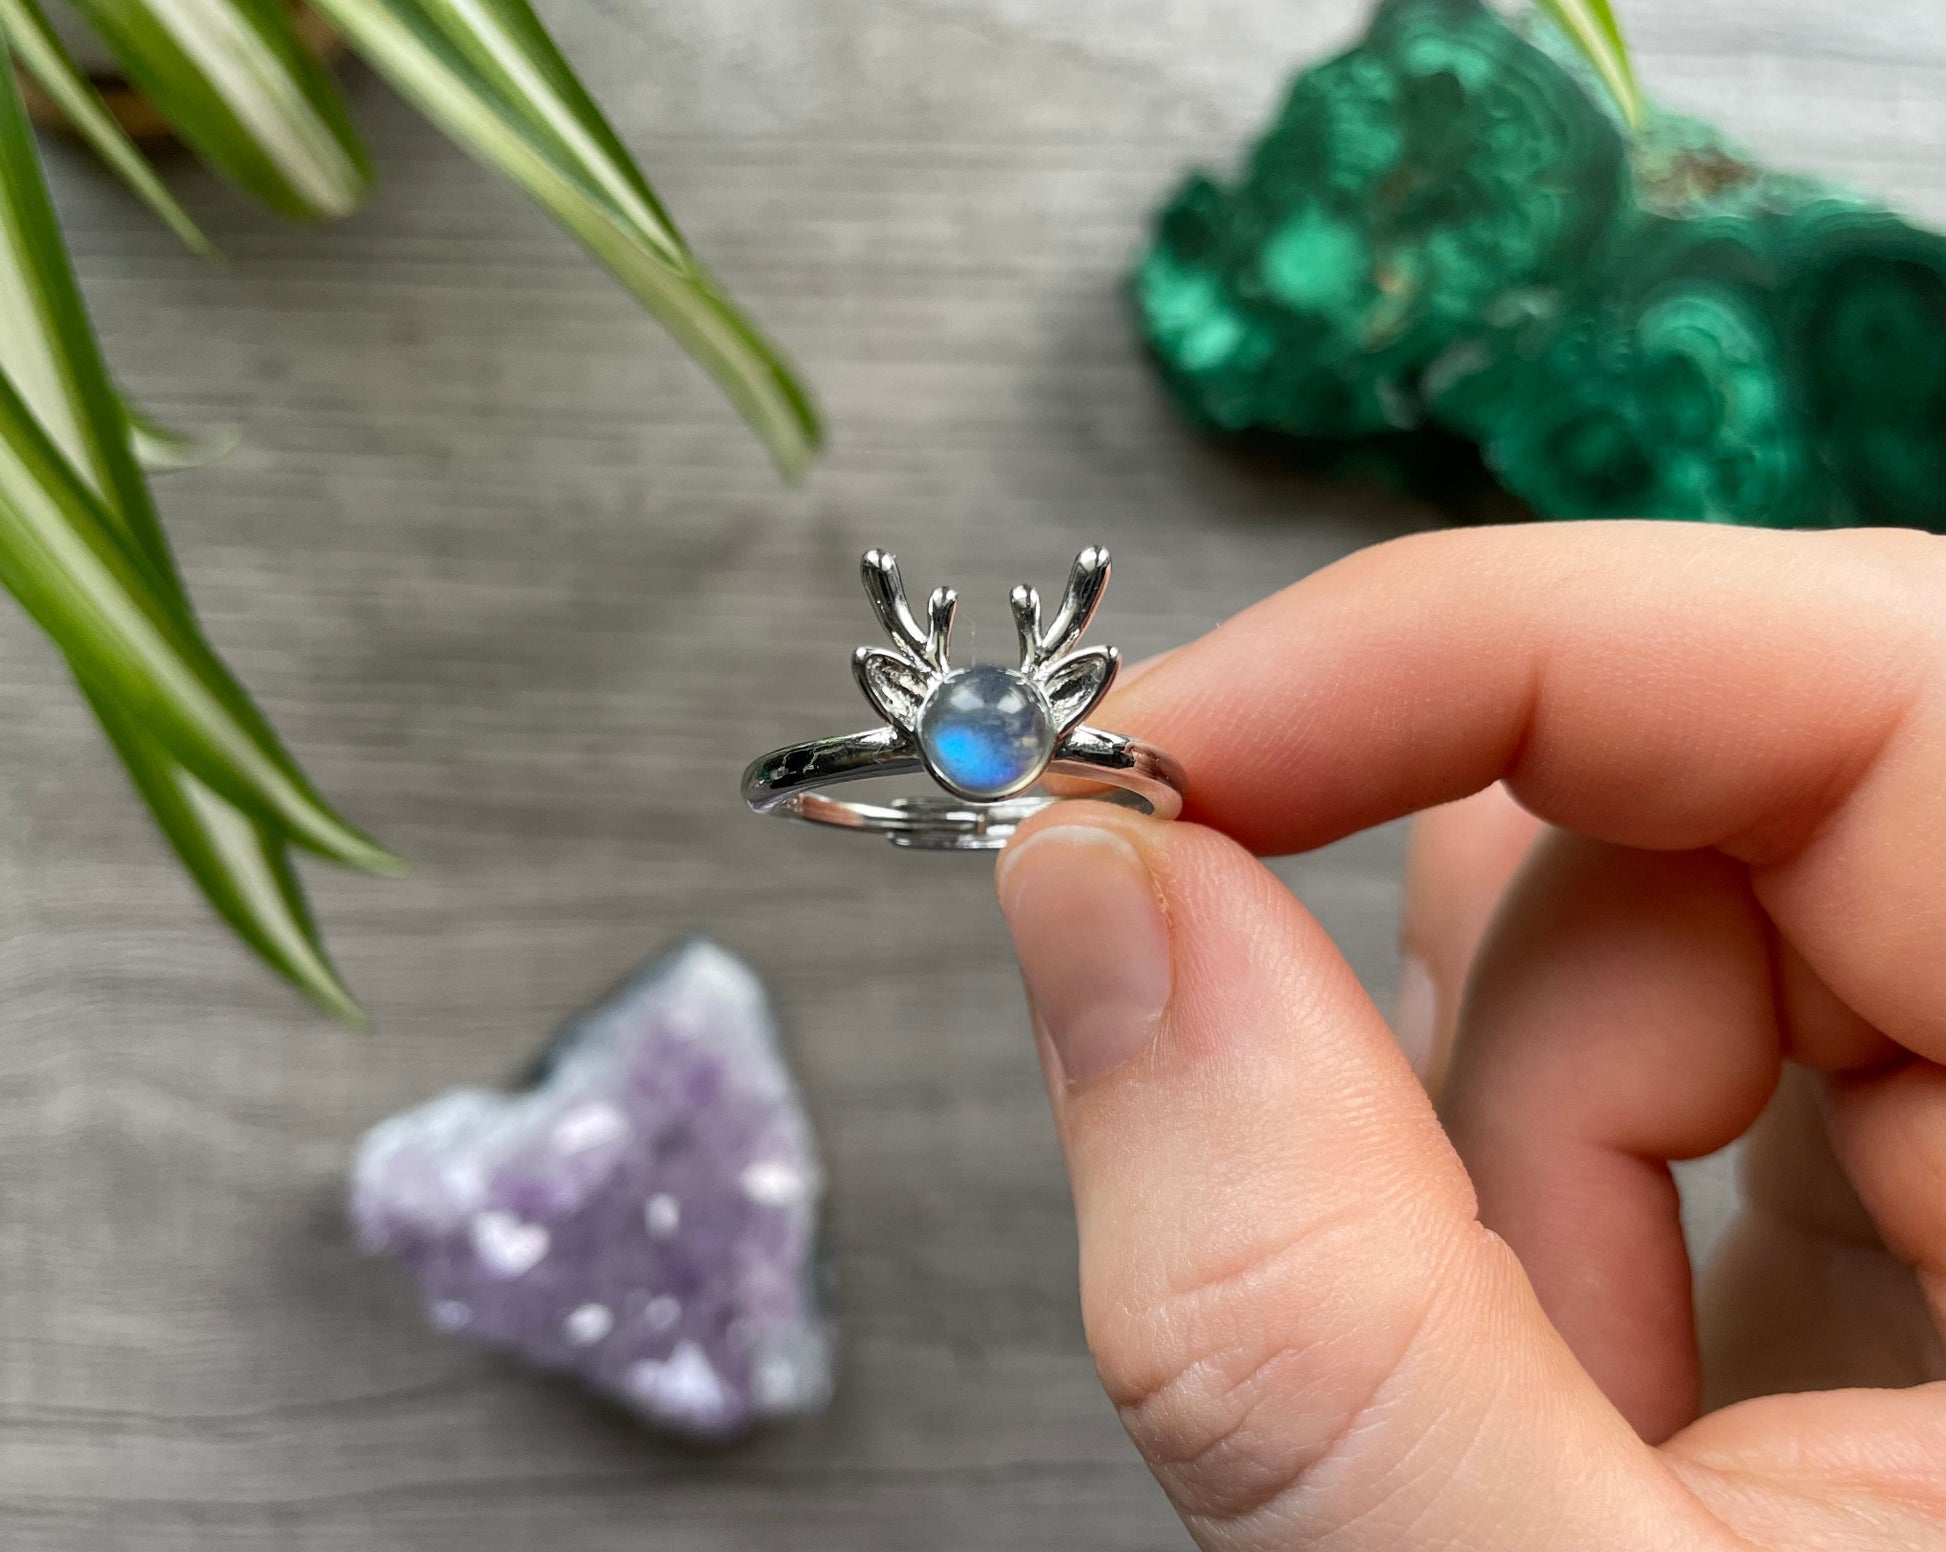 Pictured is a labradorite gemstone set in an S925 sterling silver ring. Labradorite Deer Ring - The Wandering Fox Emporium, Your Crystal Store close up